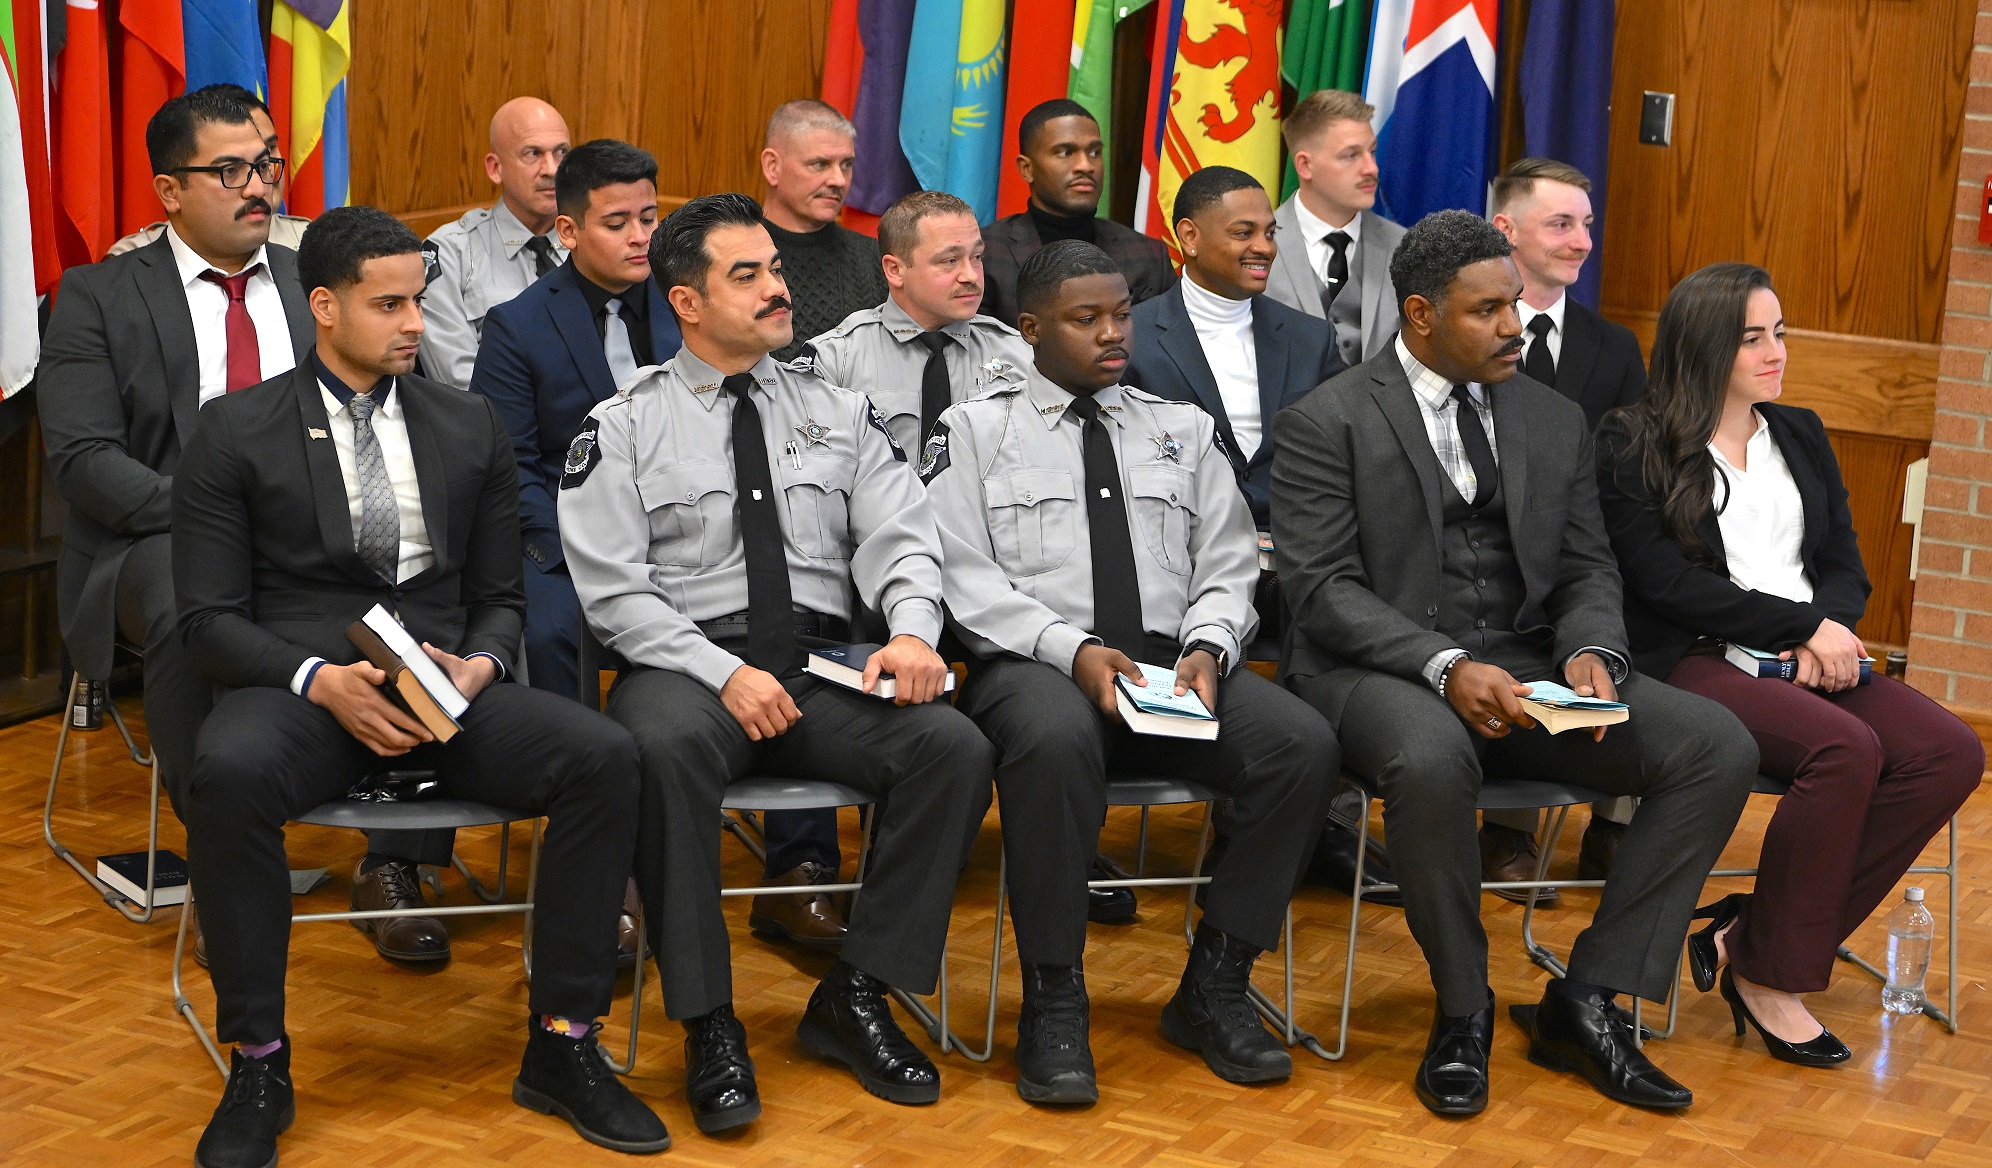 BLET graduates, some dressed in business professional attire and some in law enforcement uniforms, sit in a group at graduation.